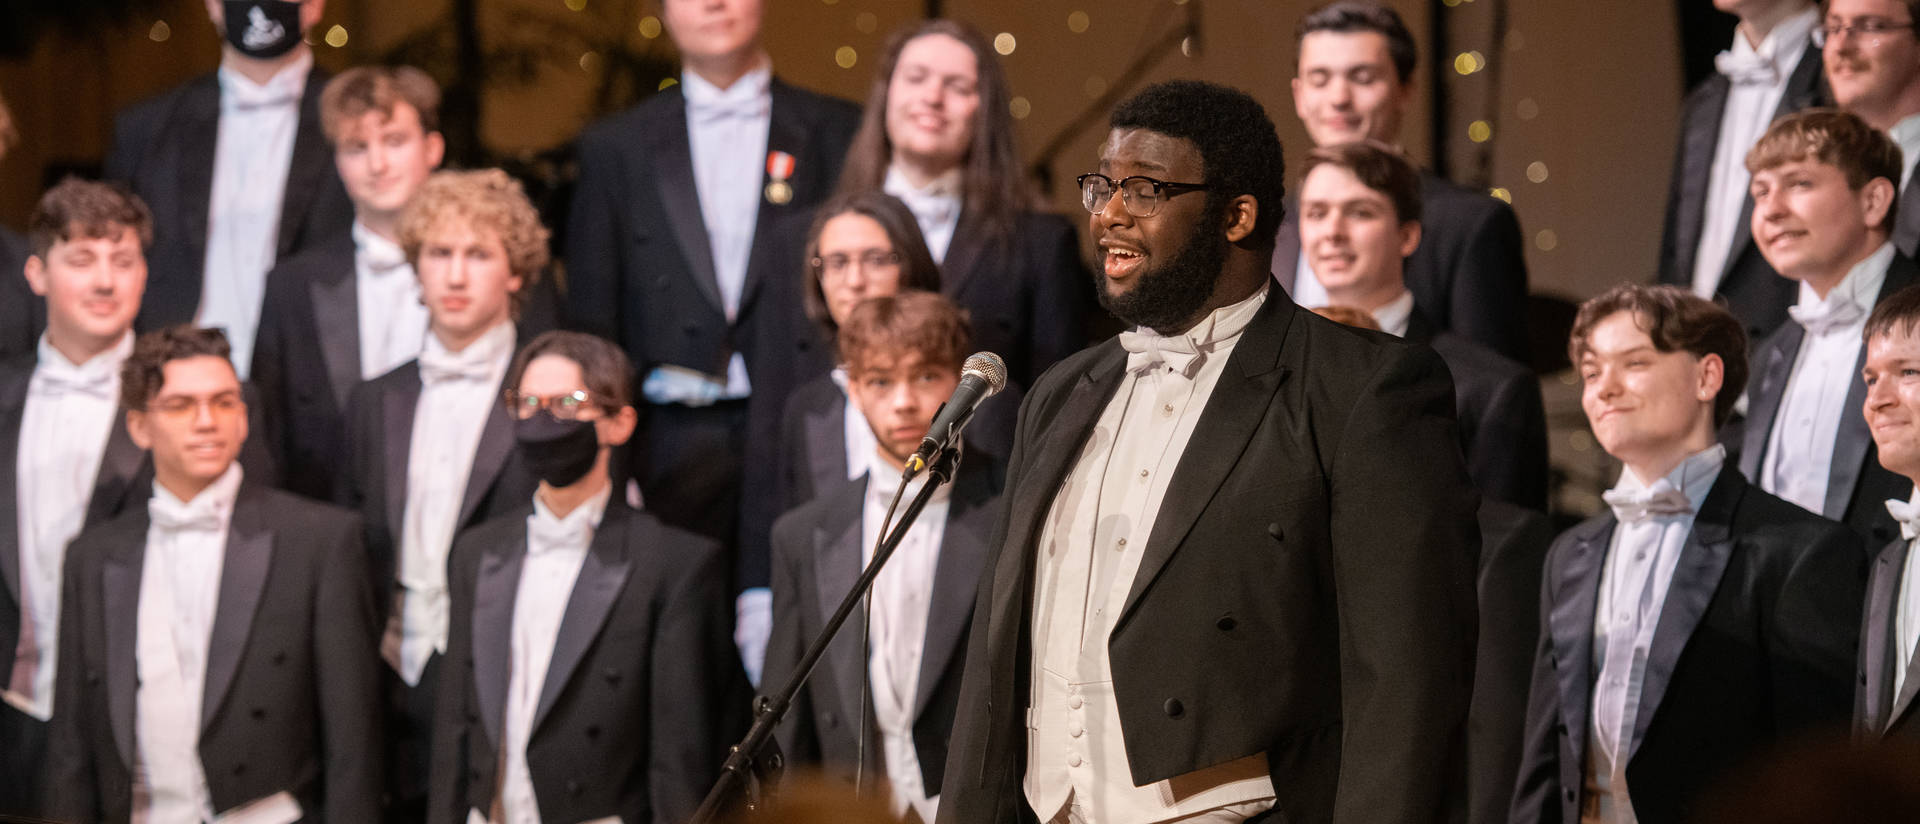 Students wearing tuxedos sing on a stage at the Viennese Ball